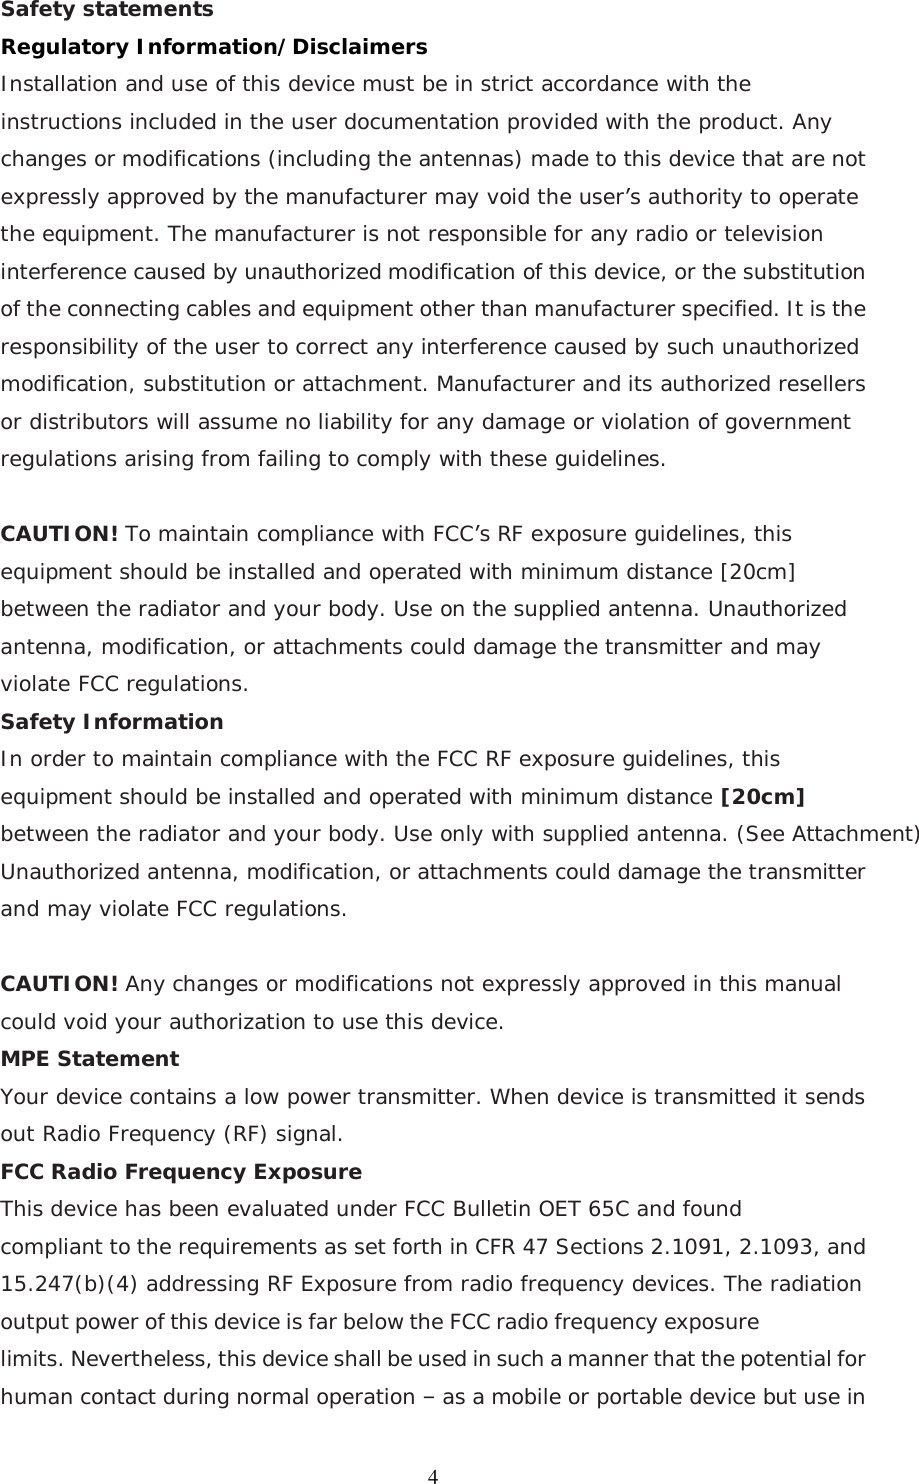  4Safety statements   Regulatory Information/Disclaimers Installation and use of this device must be in strict accordance with the instructions included in the user documentation provided with the product. Any changes or modifications (including the antennas) made to this device that are not expressly approved by the manufacturer may void the user’s authority to operate the equipment. The manufacturer is not responsible for any radio or television interference caused by unauthorized modification of this device, or the substitution of the connecting cables and equipment other than manufacturer specified. It is the responsibility of the user to correct any interference caused by such unauthorized modification, substitution or attachment. Manufacturer and its authorized resellers or distributors will assume no liability for any damage or violation of government regulations arising from failing to comply with these guidelines.  CAUTION! To maintain compliance with FCC’s RF exposure guidelines, this equipment should be installed and operated with minimum distance [20cm] between the radiator and your body. Use on the supplied antenna. Unauthorized antenna, modification, or attachments could damage the transmitter and may violate FCC regulations. Safety Information In order to maintain compliance with the FCC RF exposure guidelines, this equipment should be installed and operated with minimum distance [20cm] between the radiator and your body. Use only with supplied antenna. (See Attachment) Unauthorized antenna, modification, or attachments could damage the transmitter and may violate FCC regulations.  CAUTION! Any changes or modifications not expressly approved in this manual could void your authorization to use this device. MPE Statement Your device contains a low power transmitter. When device is transmitted it sends out Radio Frequency (RF) signal.  FCC Radio Frequency Exposure This device has been evaluated under FCC Bulletin OET 65C and found compliant to the requirements as set forth in CFR 47 Sections 2.1091, 2.1093, and 15.247(b)(4) addressing RF Exposure from radio frequency devices. The radiation output power of this device is far below the FCC radio frequency exposure limits. Nevertheless, this device shall be used in such a manner that the potential for human contact during normal operation – as a mobile or portable device but use in 